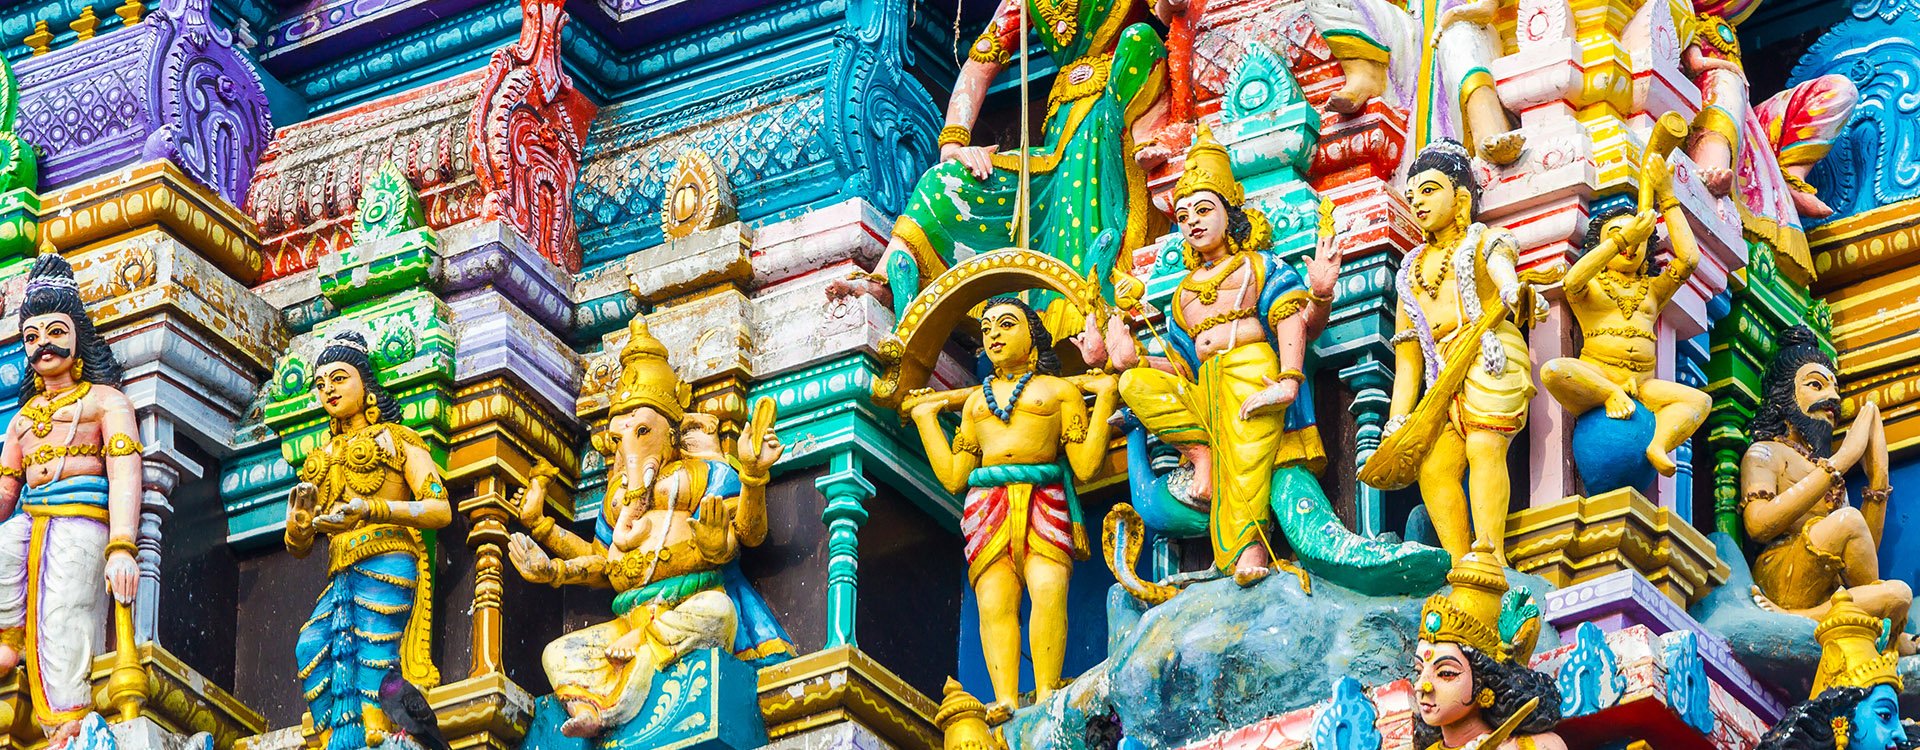 Closeup details on the tower of a Hindu Temple dedicated to Lord Shiva in Colombo, Sri Lanka